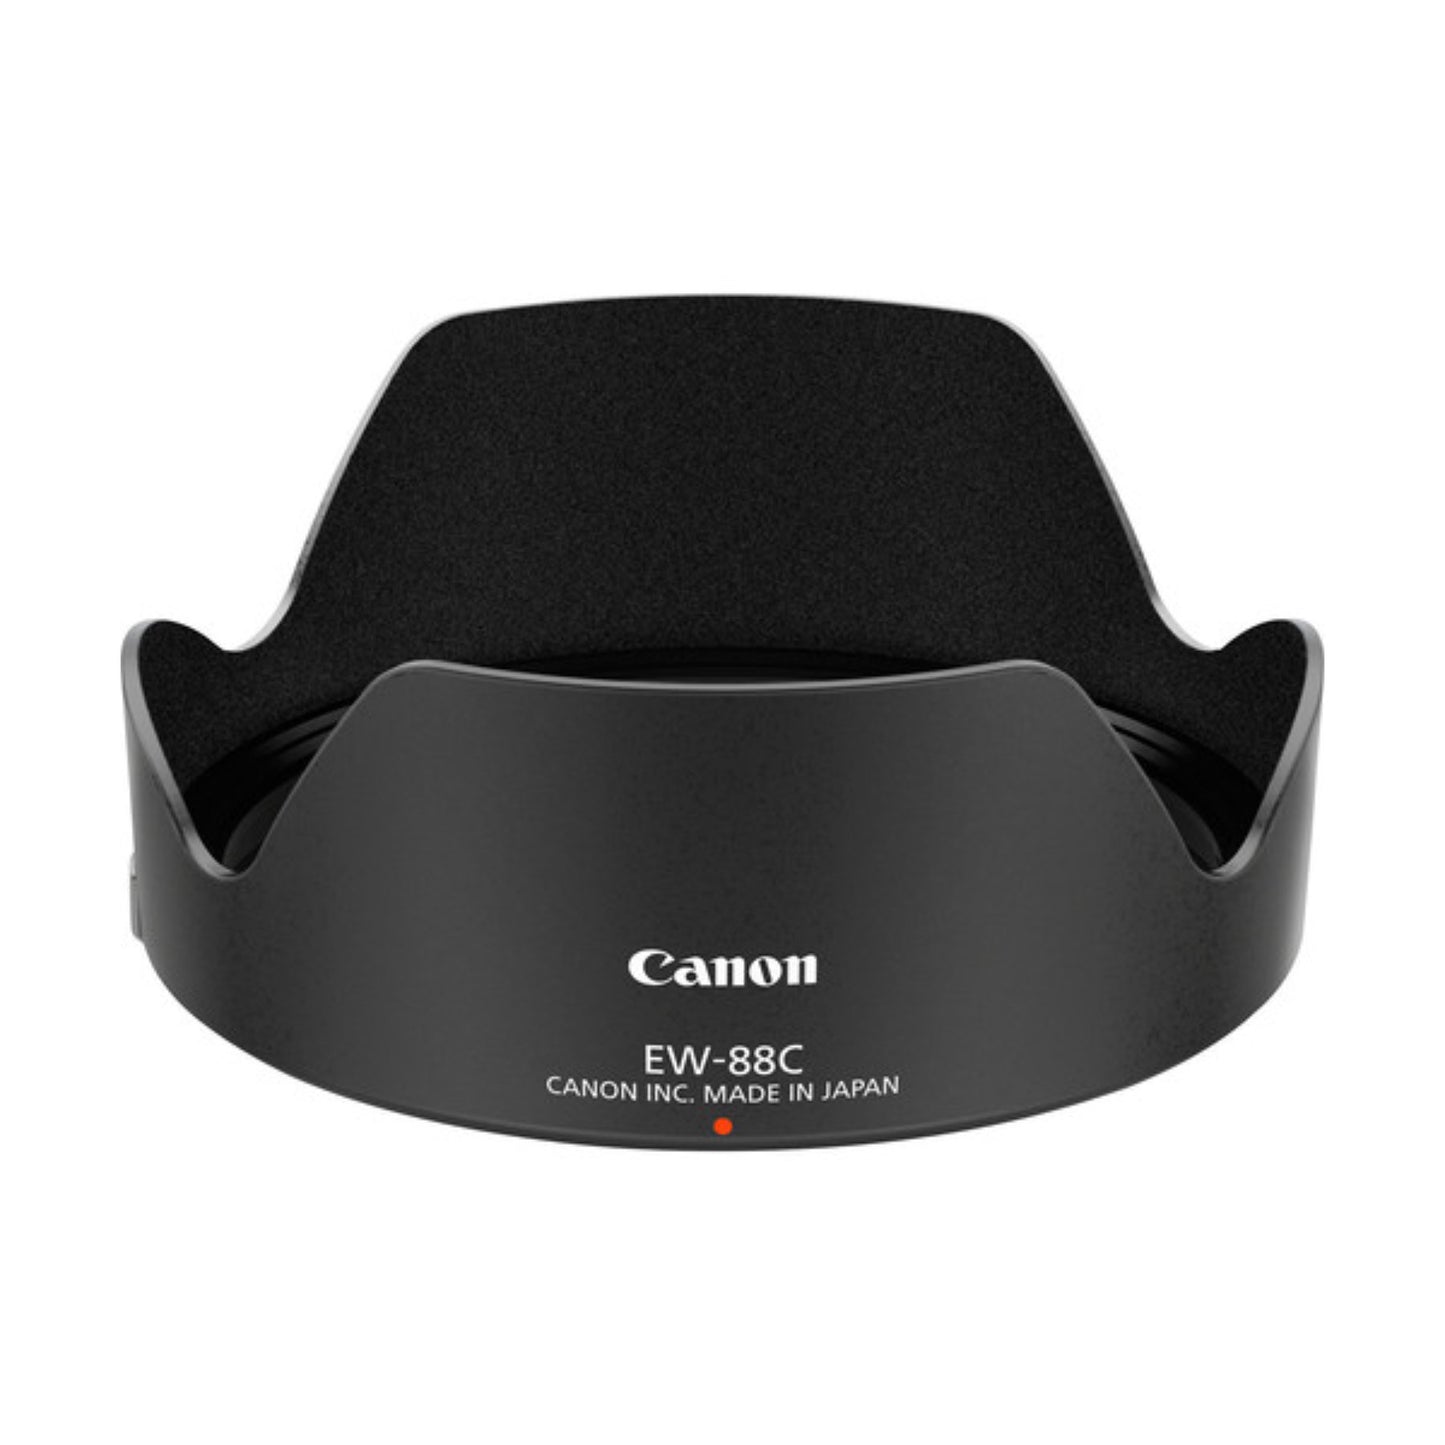 Buy Canon EW-88C Lens Hood for EF 24-70mm f/2.8L II USM Lens at Topic Store